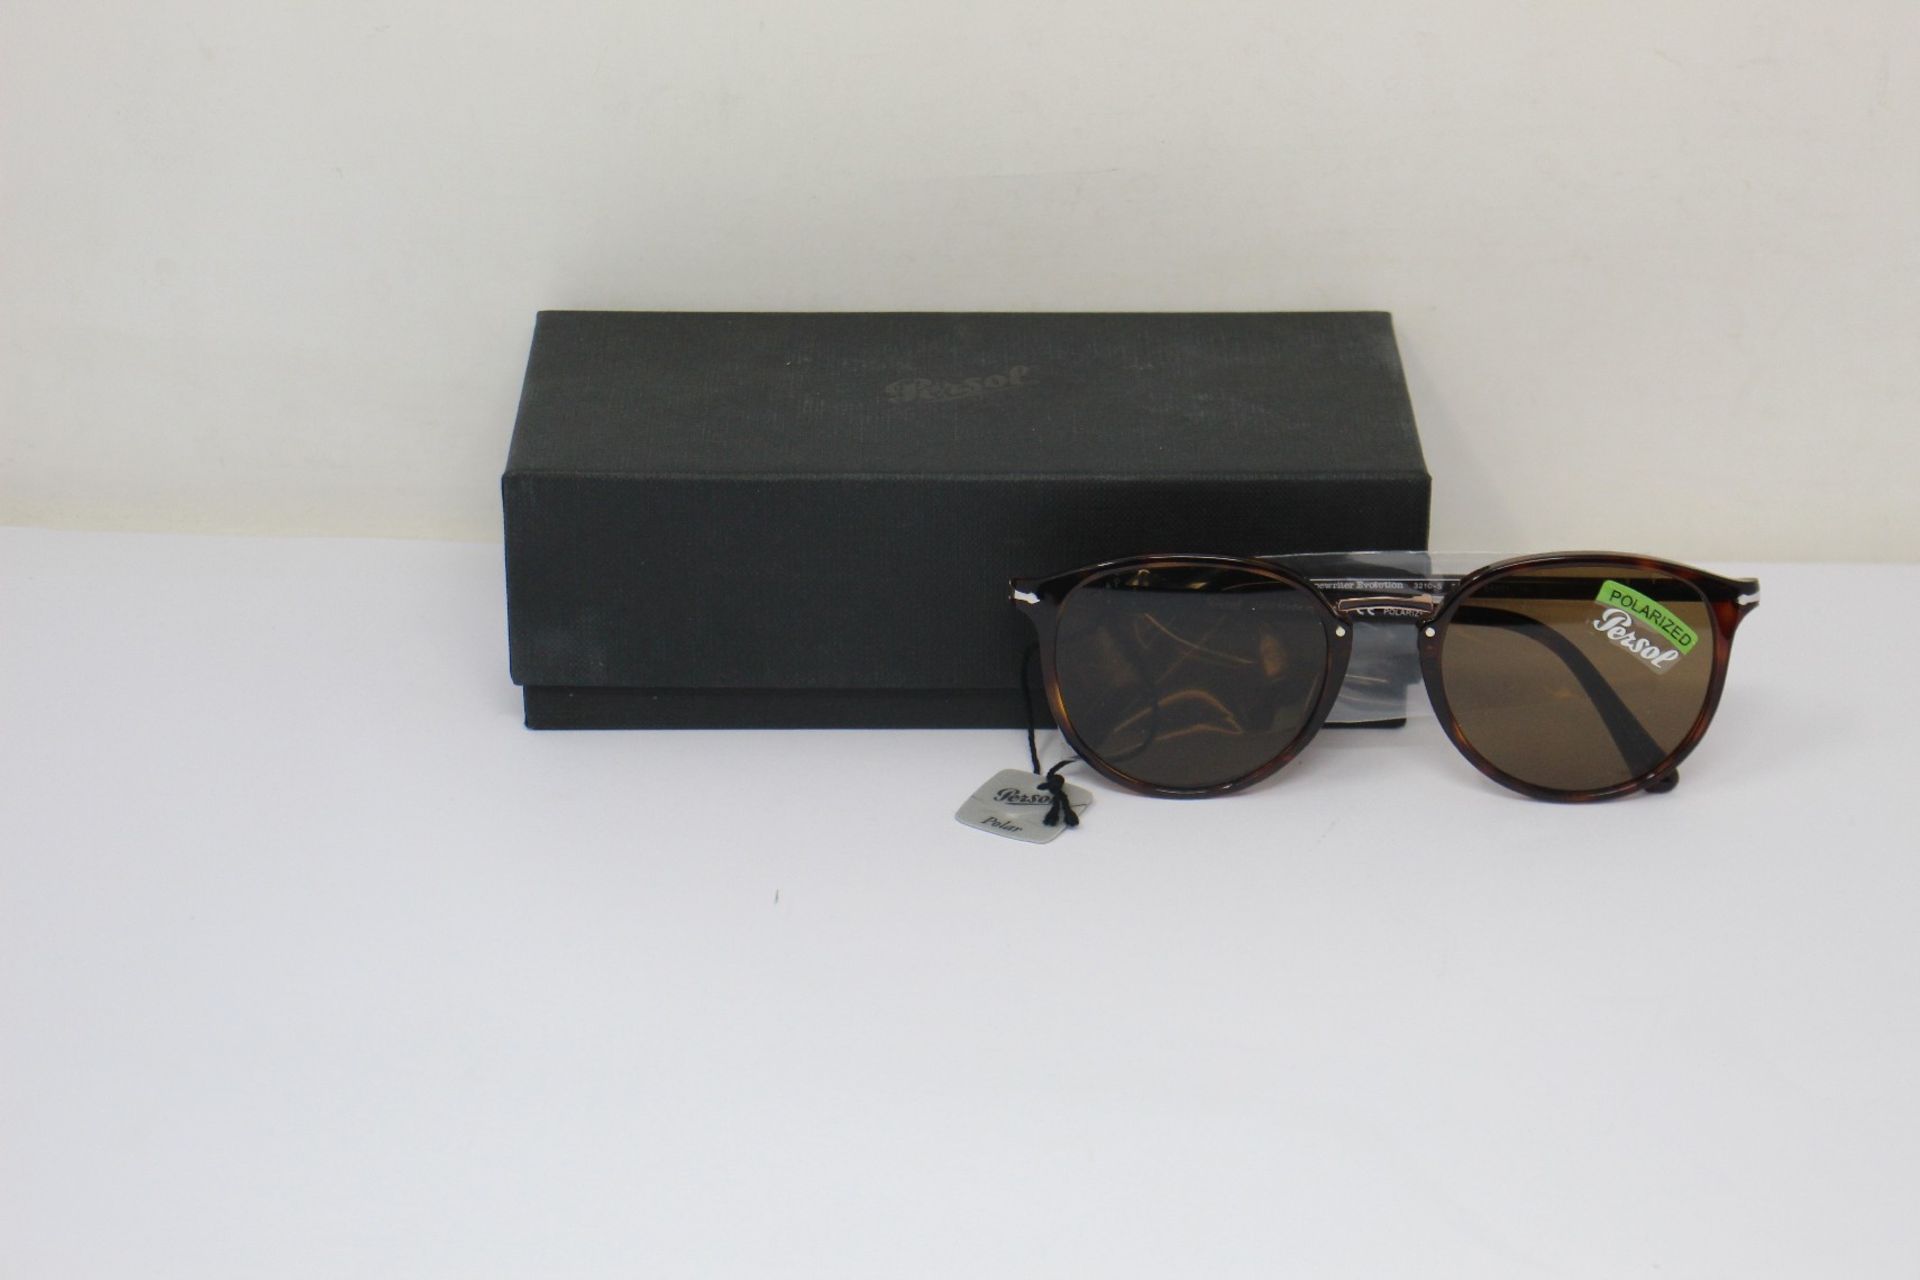 A pair of as new Persol sunglasses.